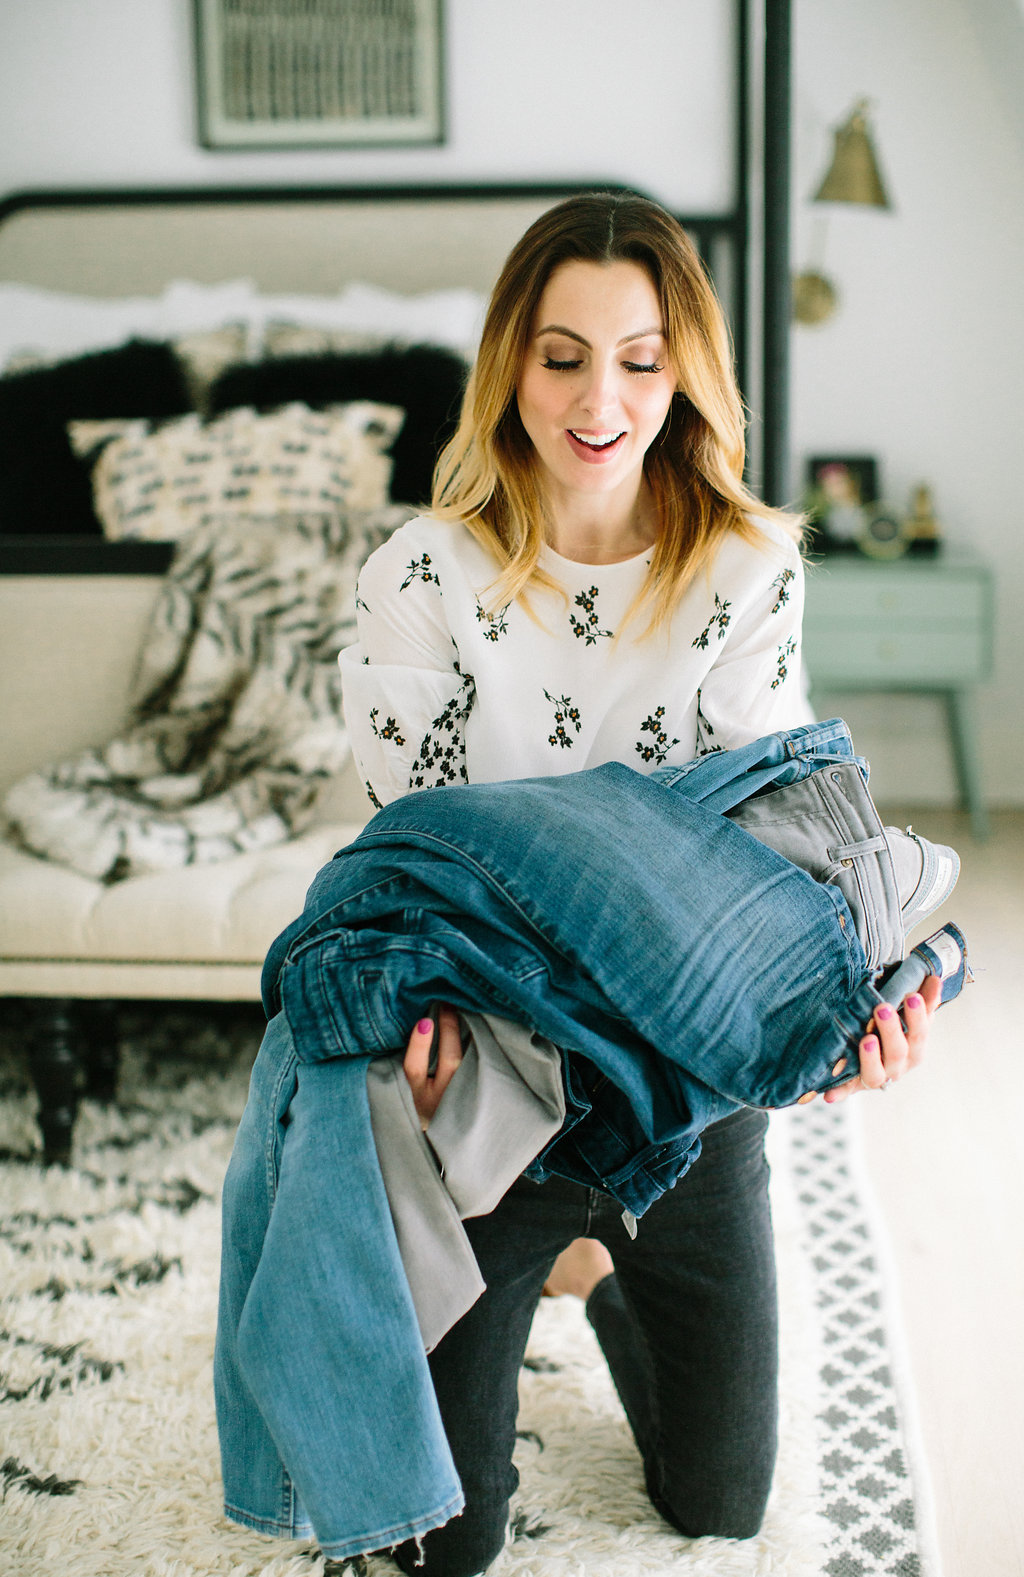 Eva Amurri Martino holds a large pile of jeans as she cleans out her closet for Spring